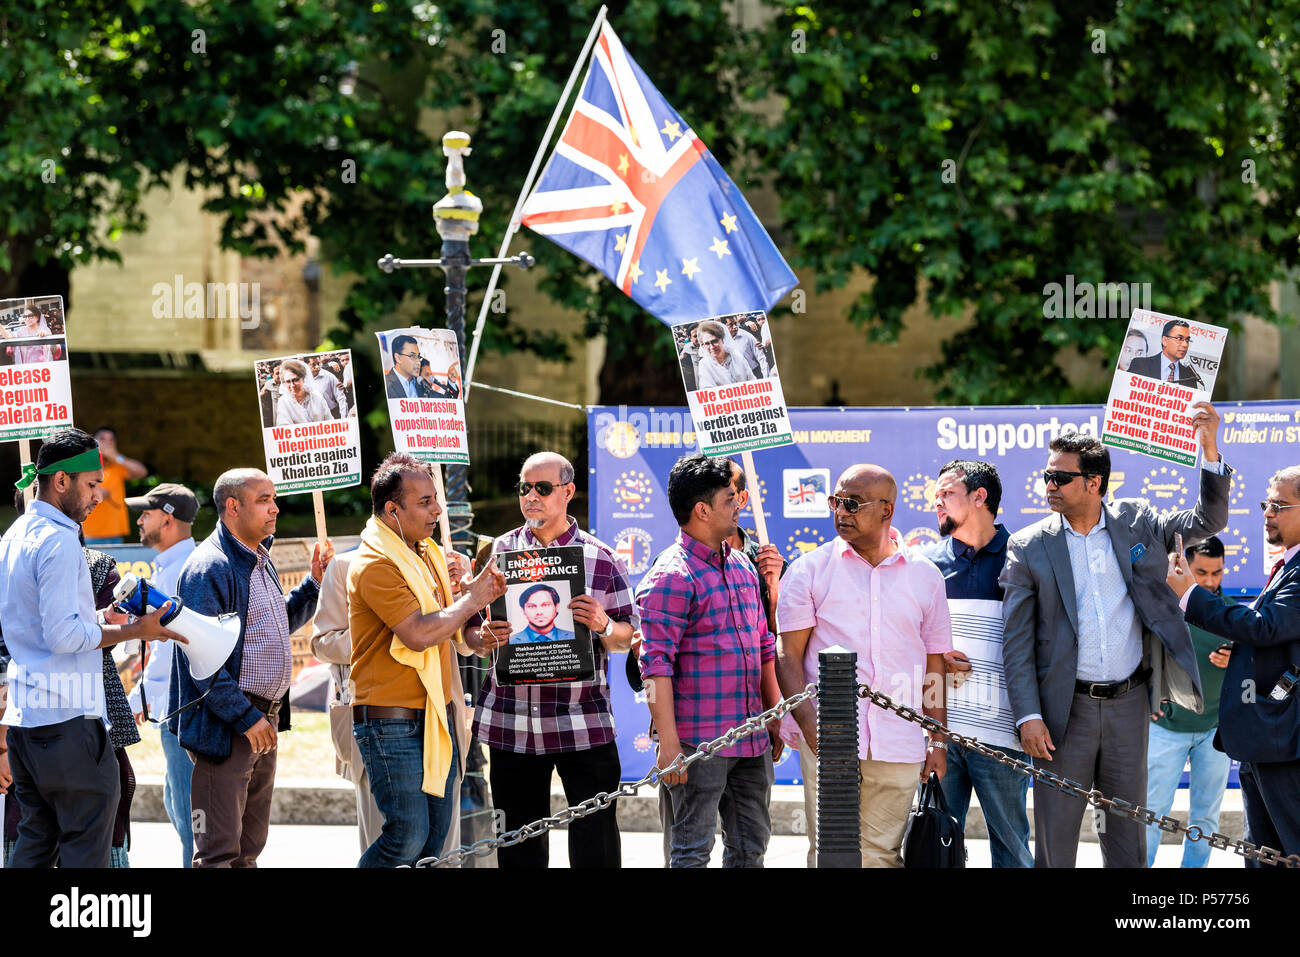 London, United Kingdom - June 25, 2018: People, flags at Bangladesh and anti Brexit protest in UK England by Westminster, signs for releasing Begum Khaleda Zia, Terique Rahman Credit: Kristina Blokhin/Alamy Live News Stock Photo